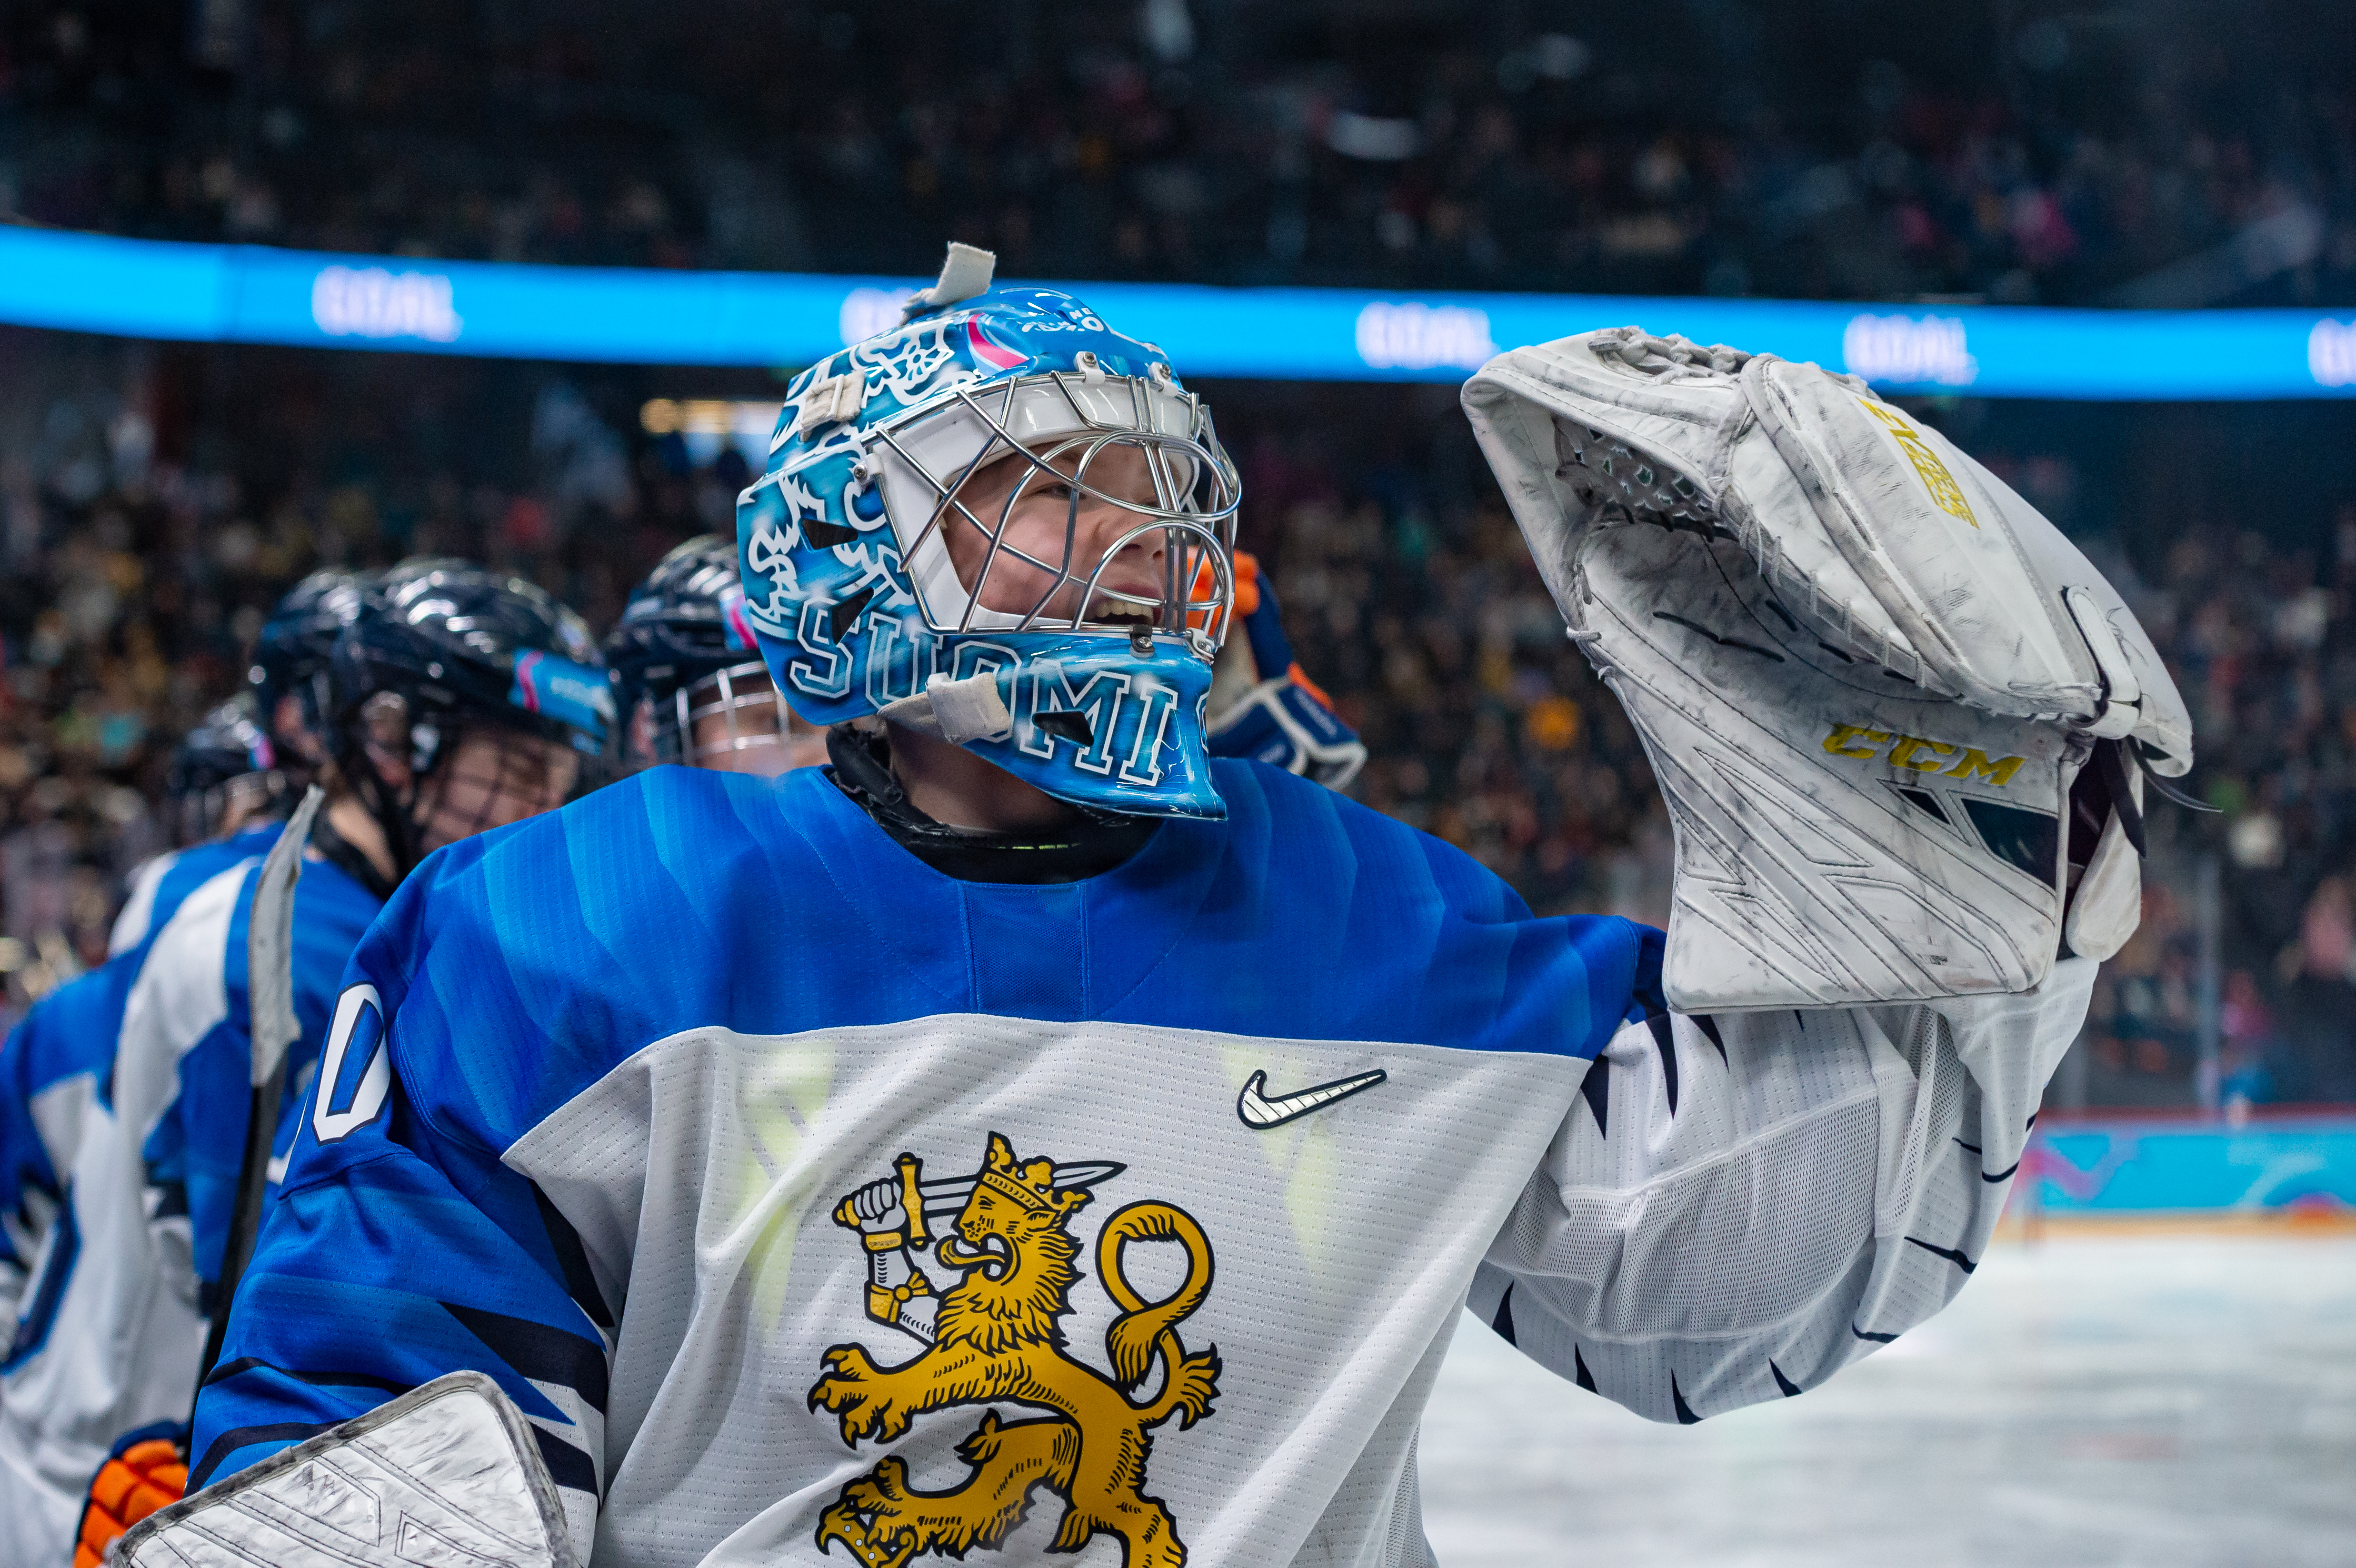 Niklas Kokko celebrates a teammate’s goal with glove hand up in the air, donning the uniform of Team Finland and a blue goalie mask that says “Suomi” along the bottom